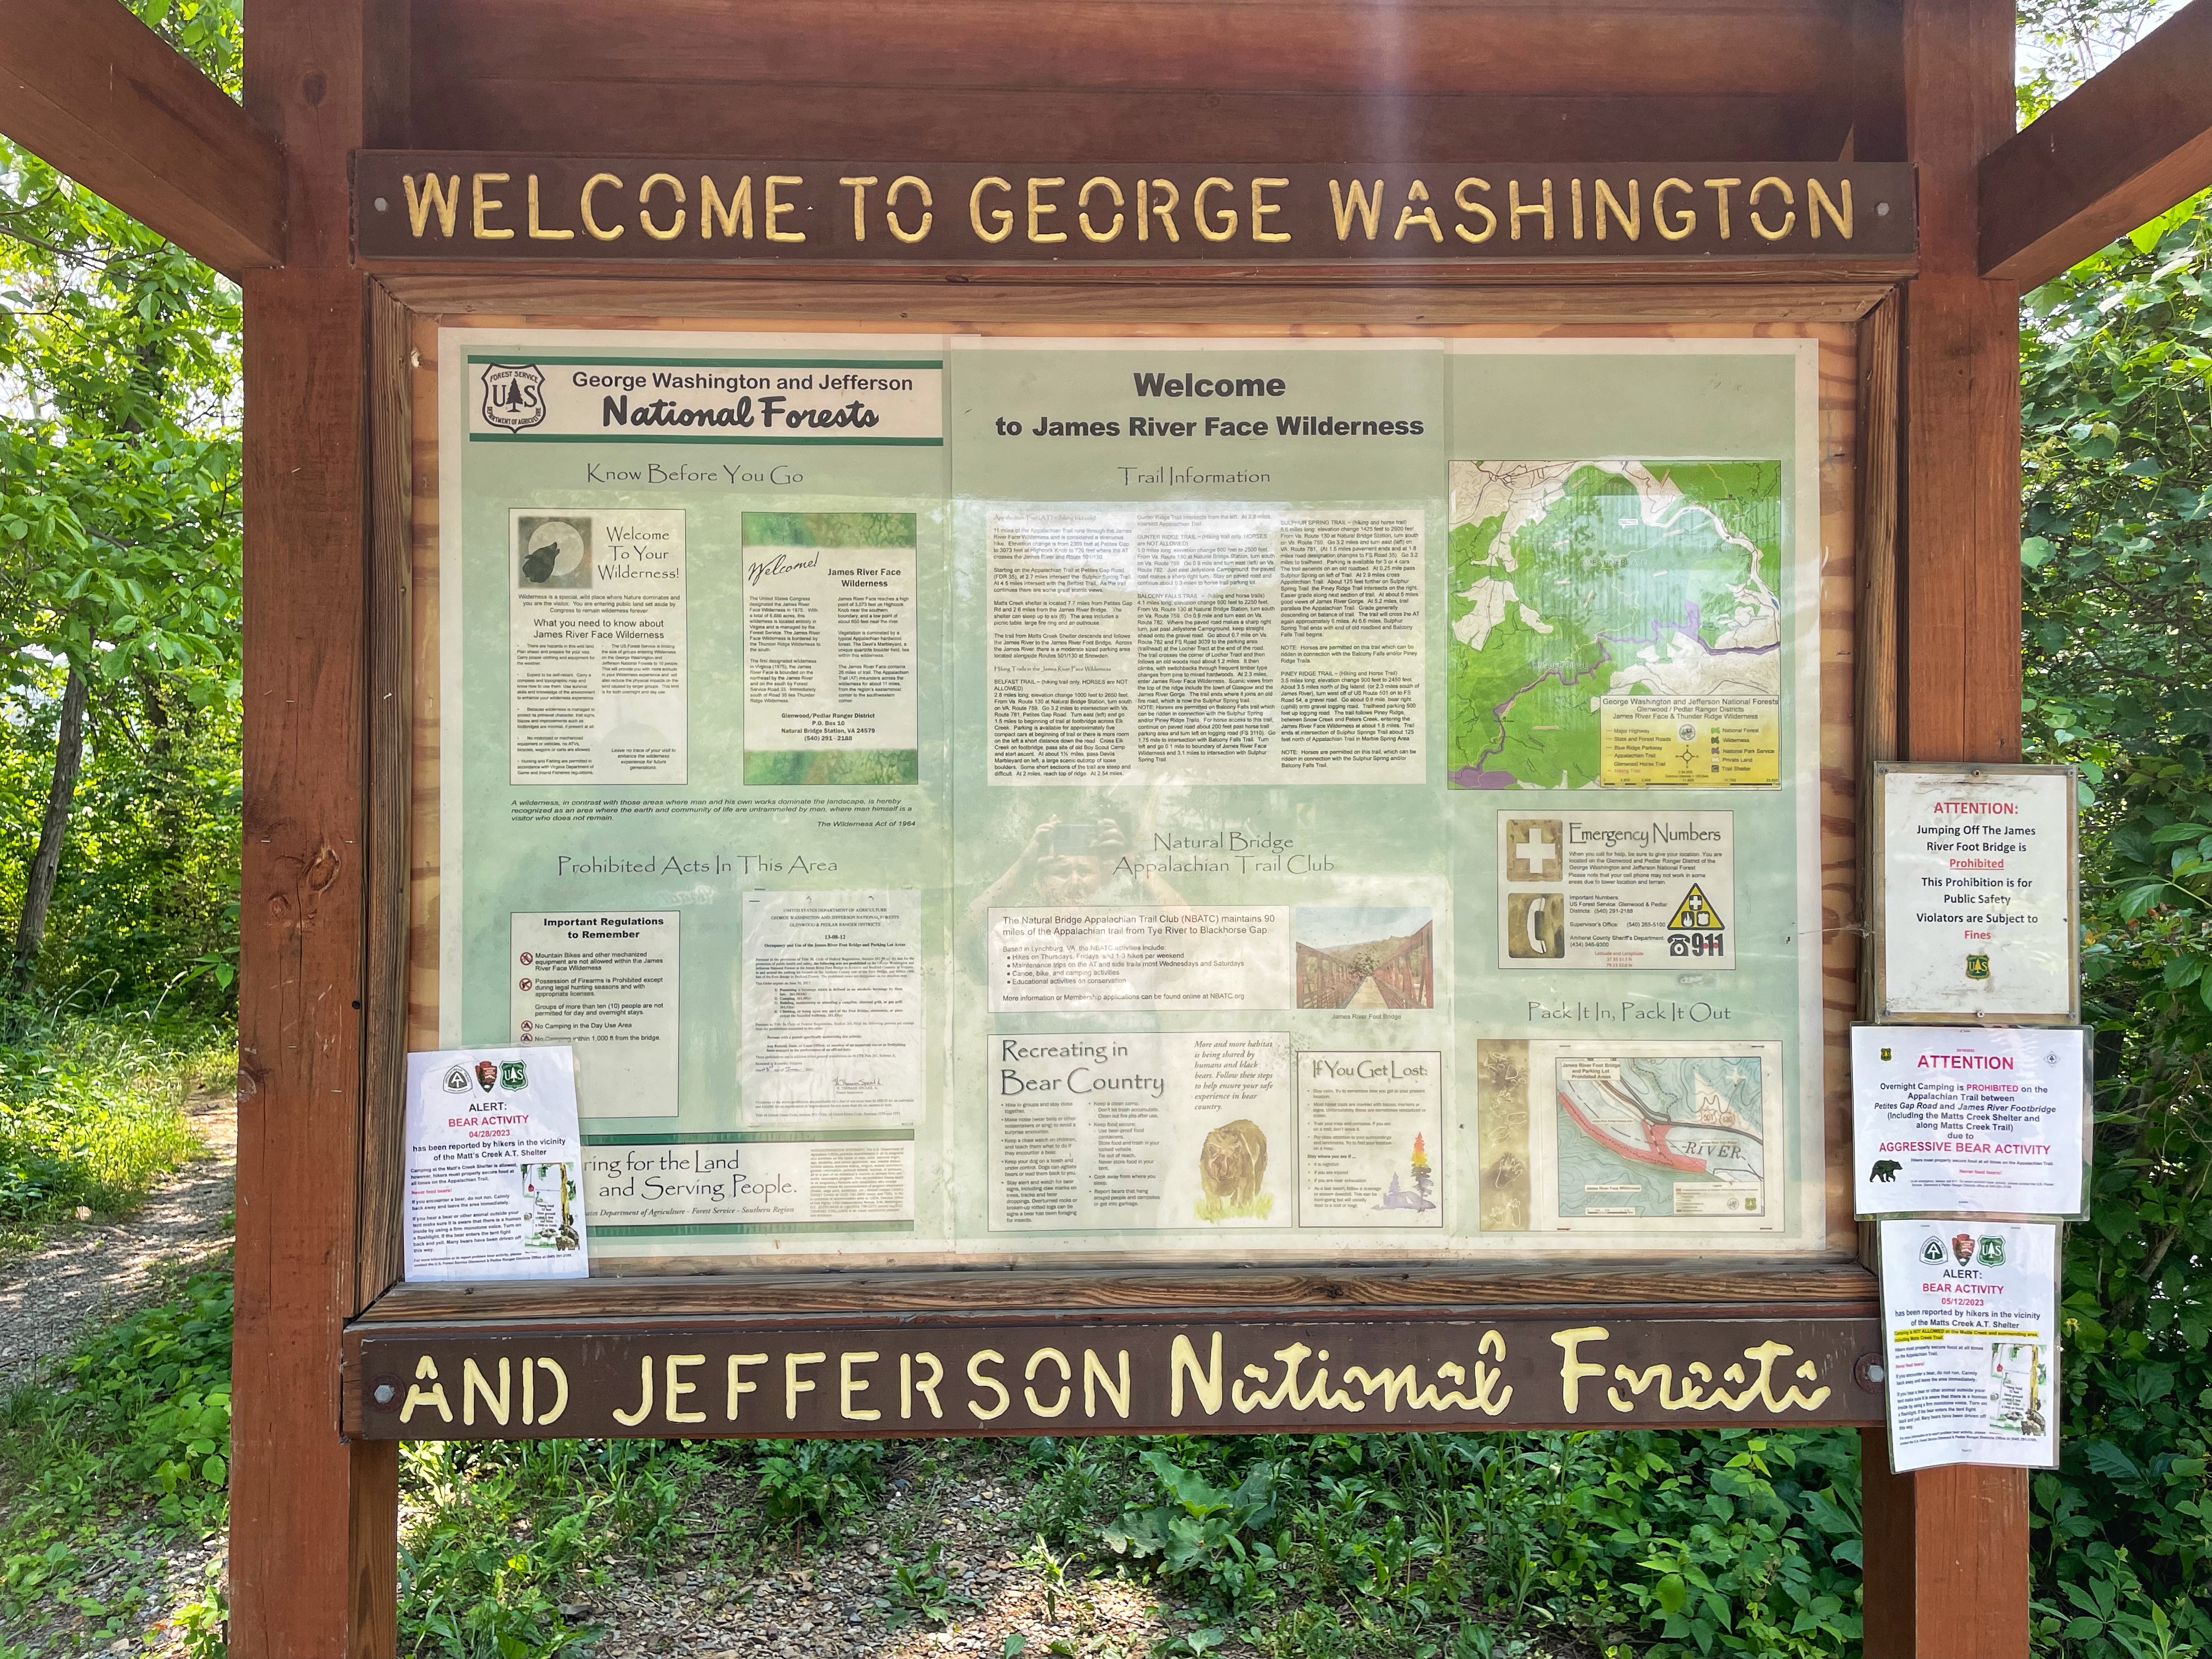 CHRISTINA AND BEN MCMILLAN's photo of an informational sign in George Washington and Jefferson National Forest